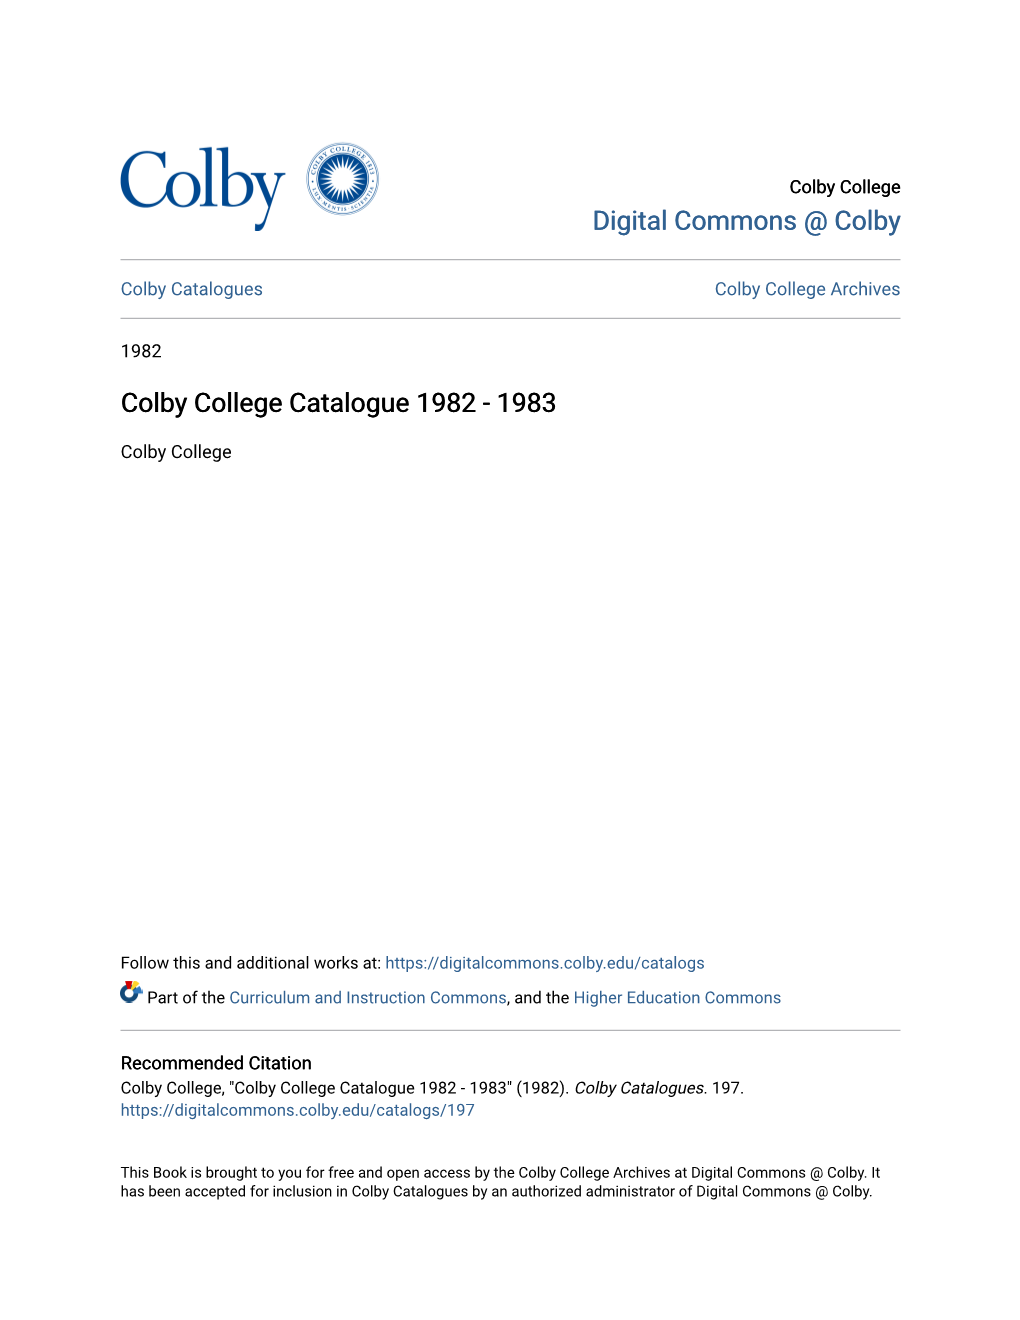 Colby College Catalogue 1982 - 1983